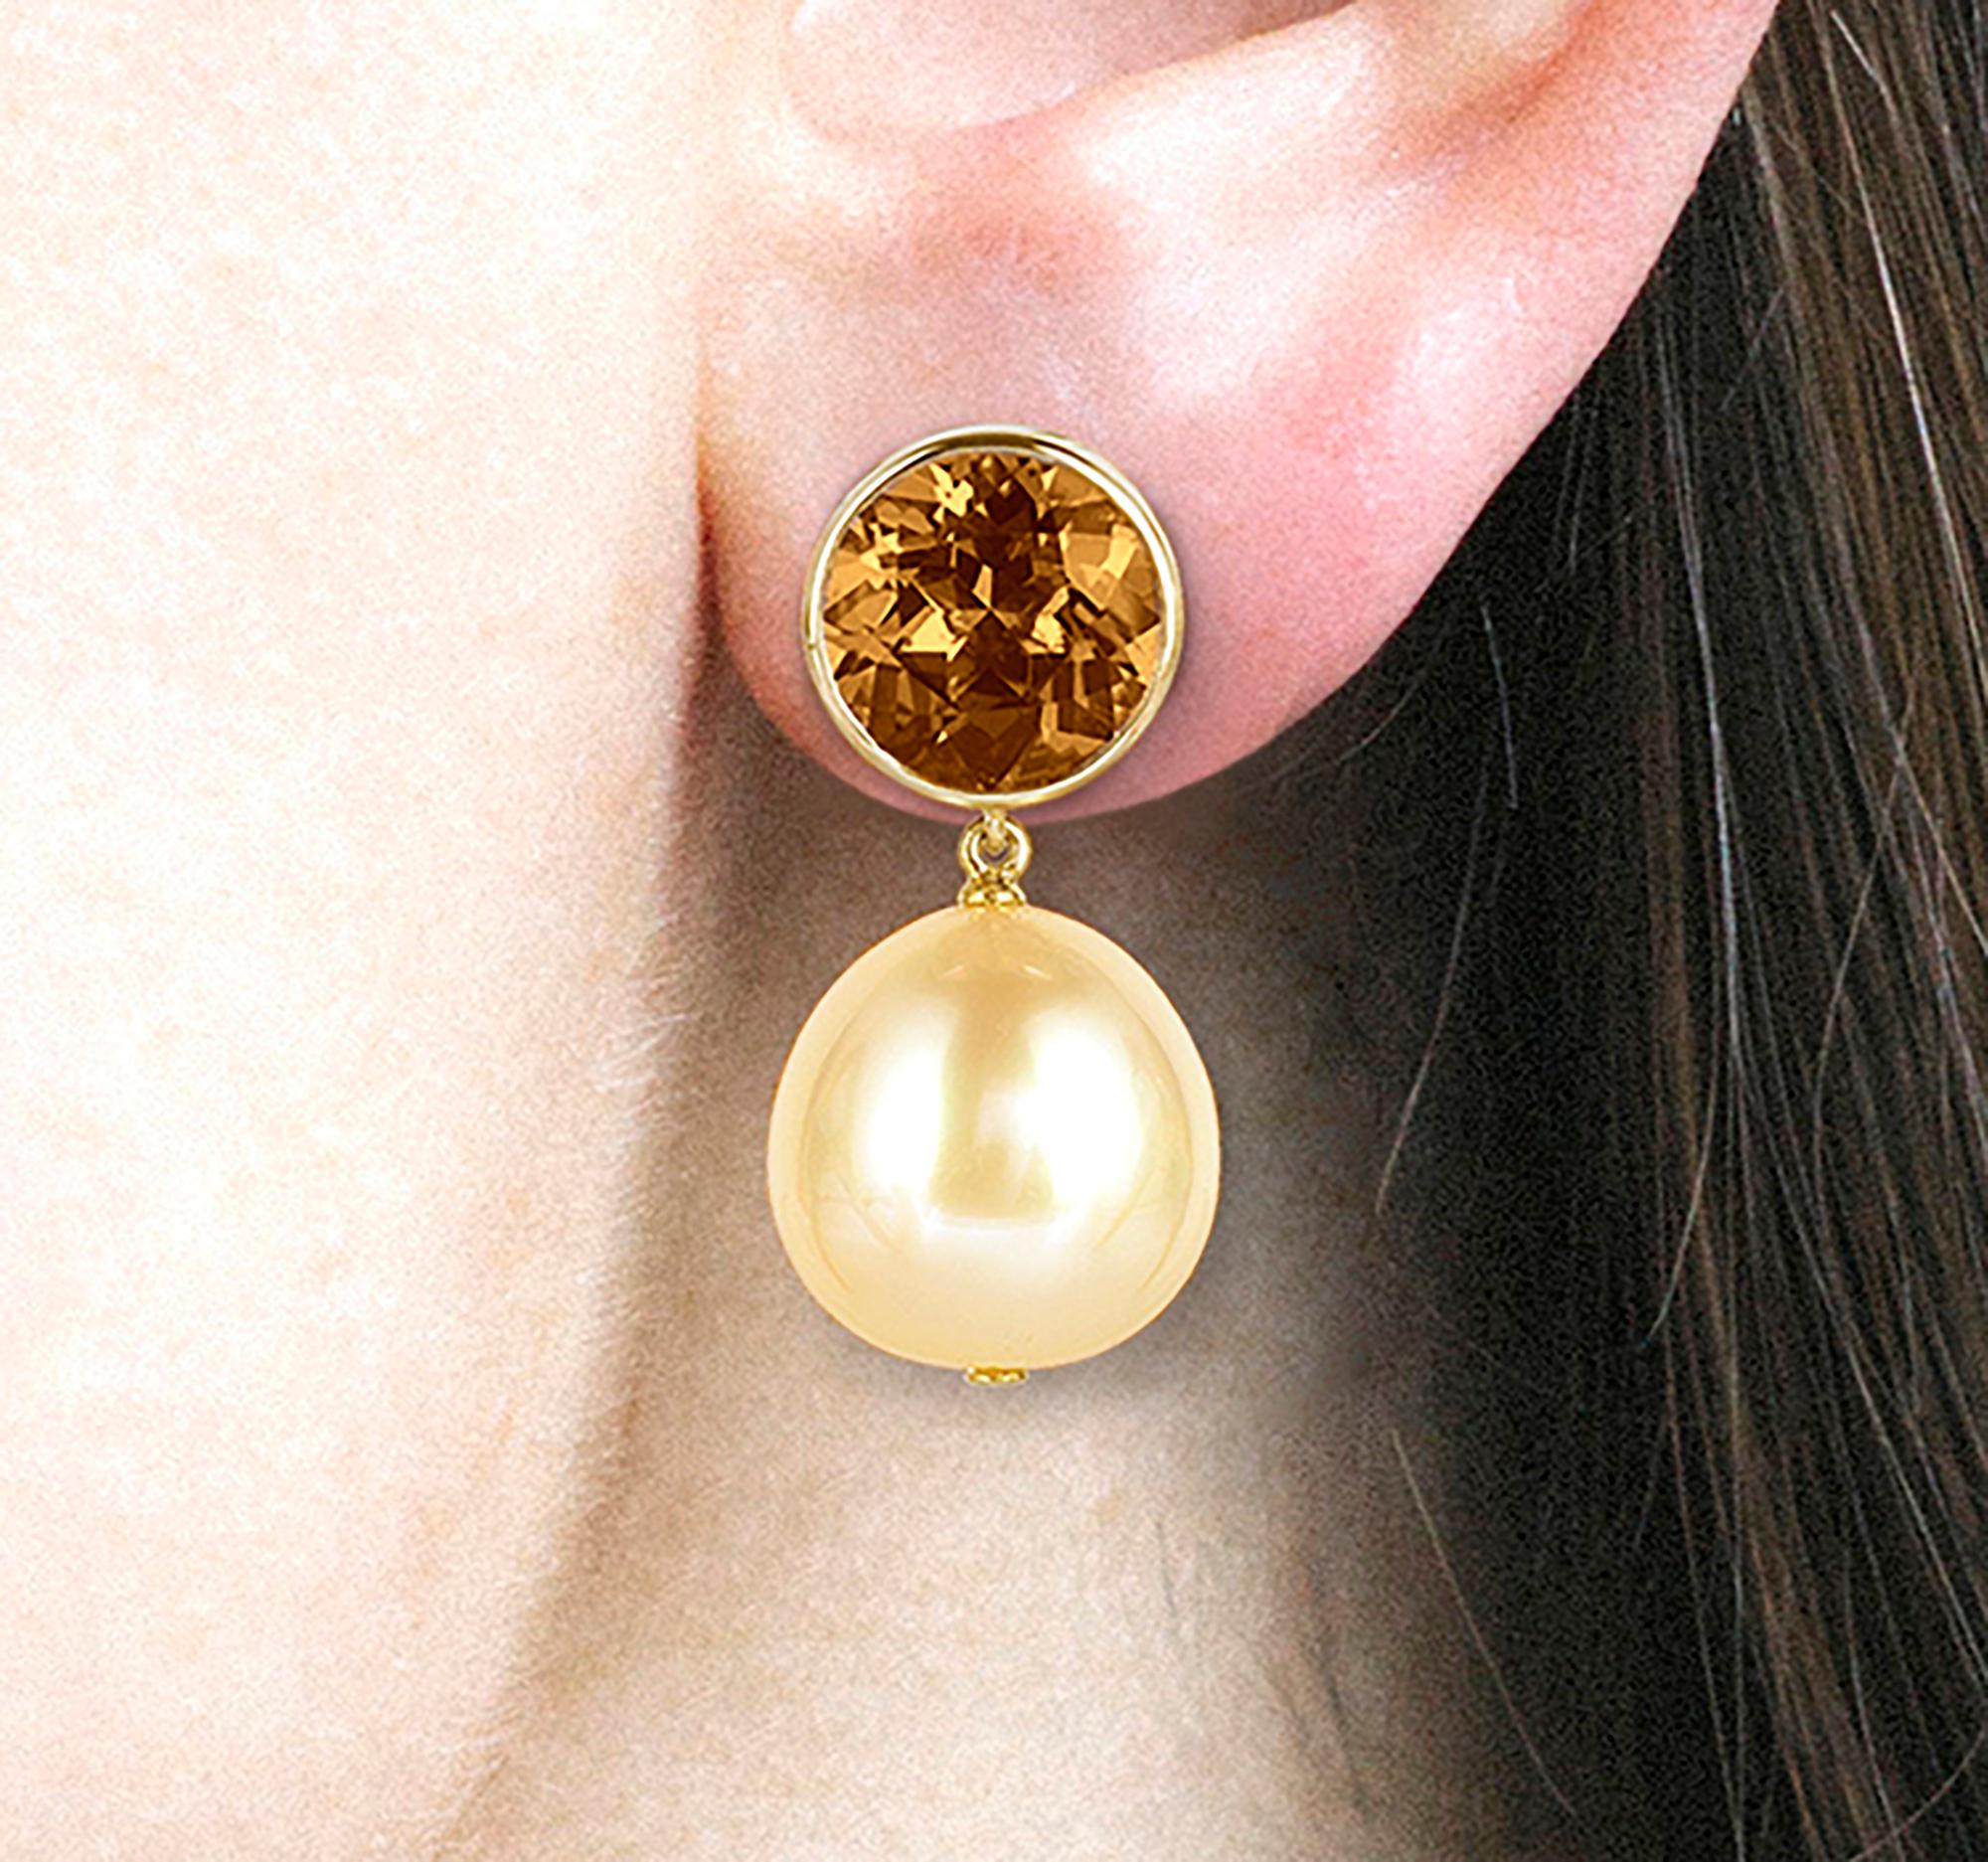 Bezel Set Round Stud Earrings in 18K Yellow Gold with Gold Pearl & Omega Clip, from 'Gossip' Collection

Stone Size: 10 mm 